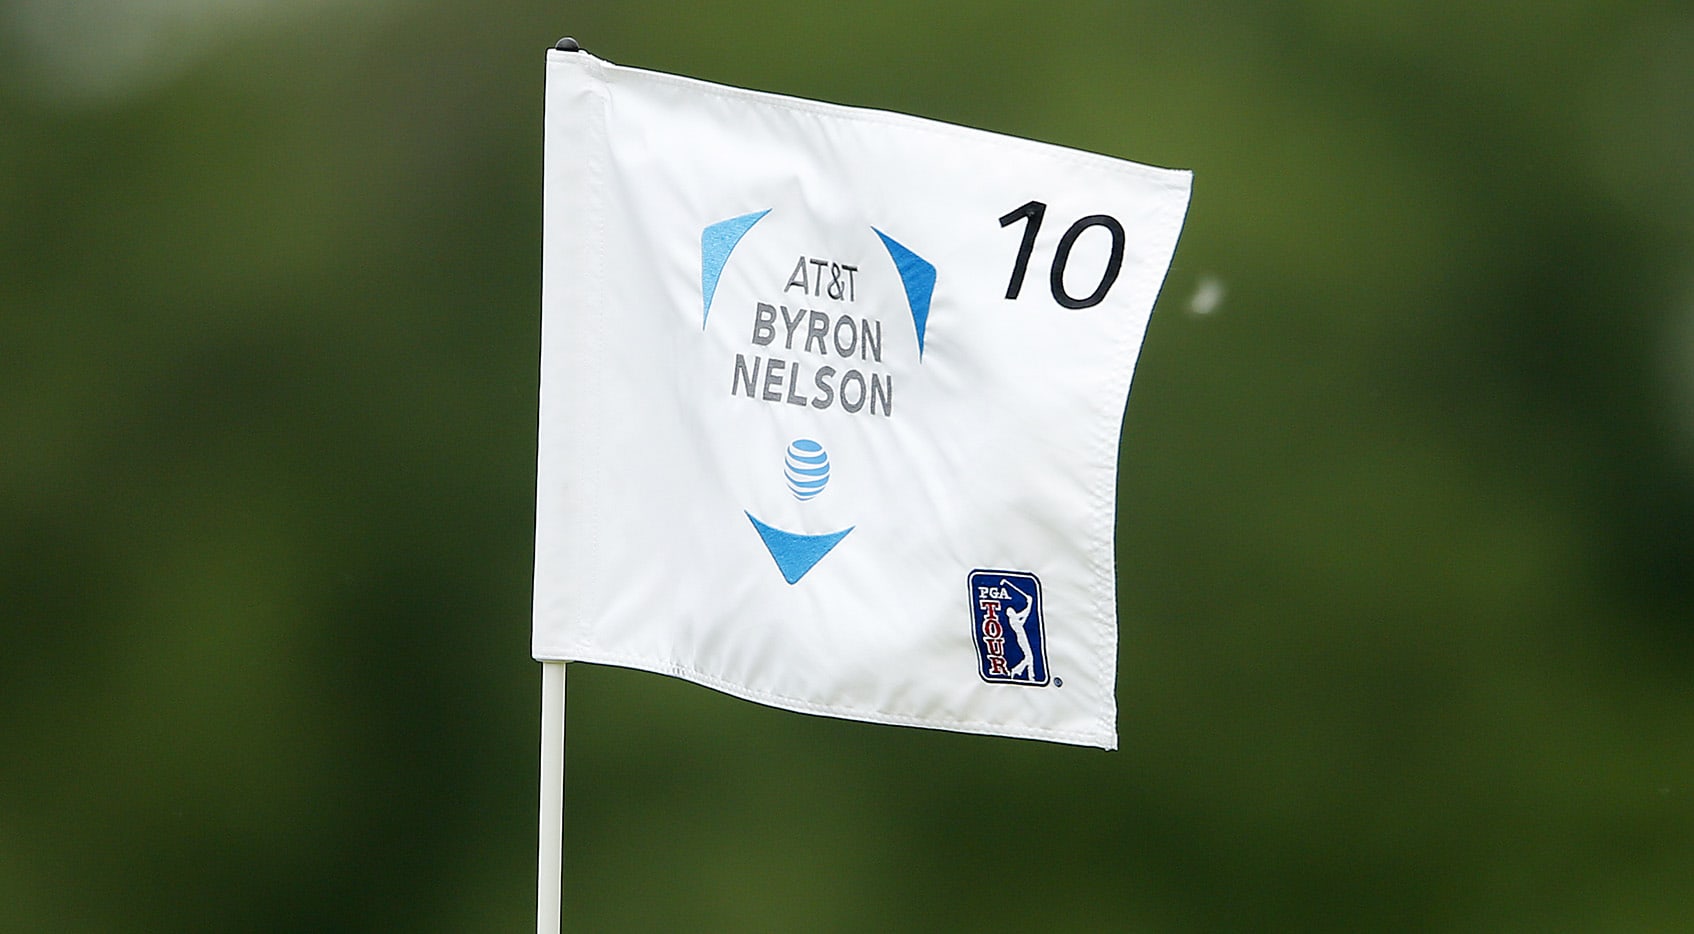 How to watch AT&T Byron Nelson, Round 2 Featured Groups, live scores